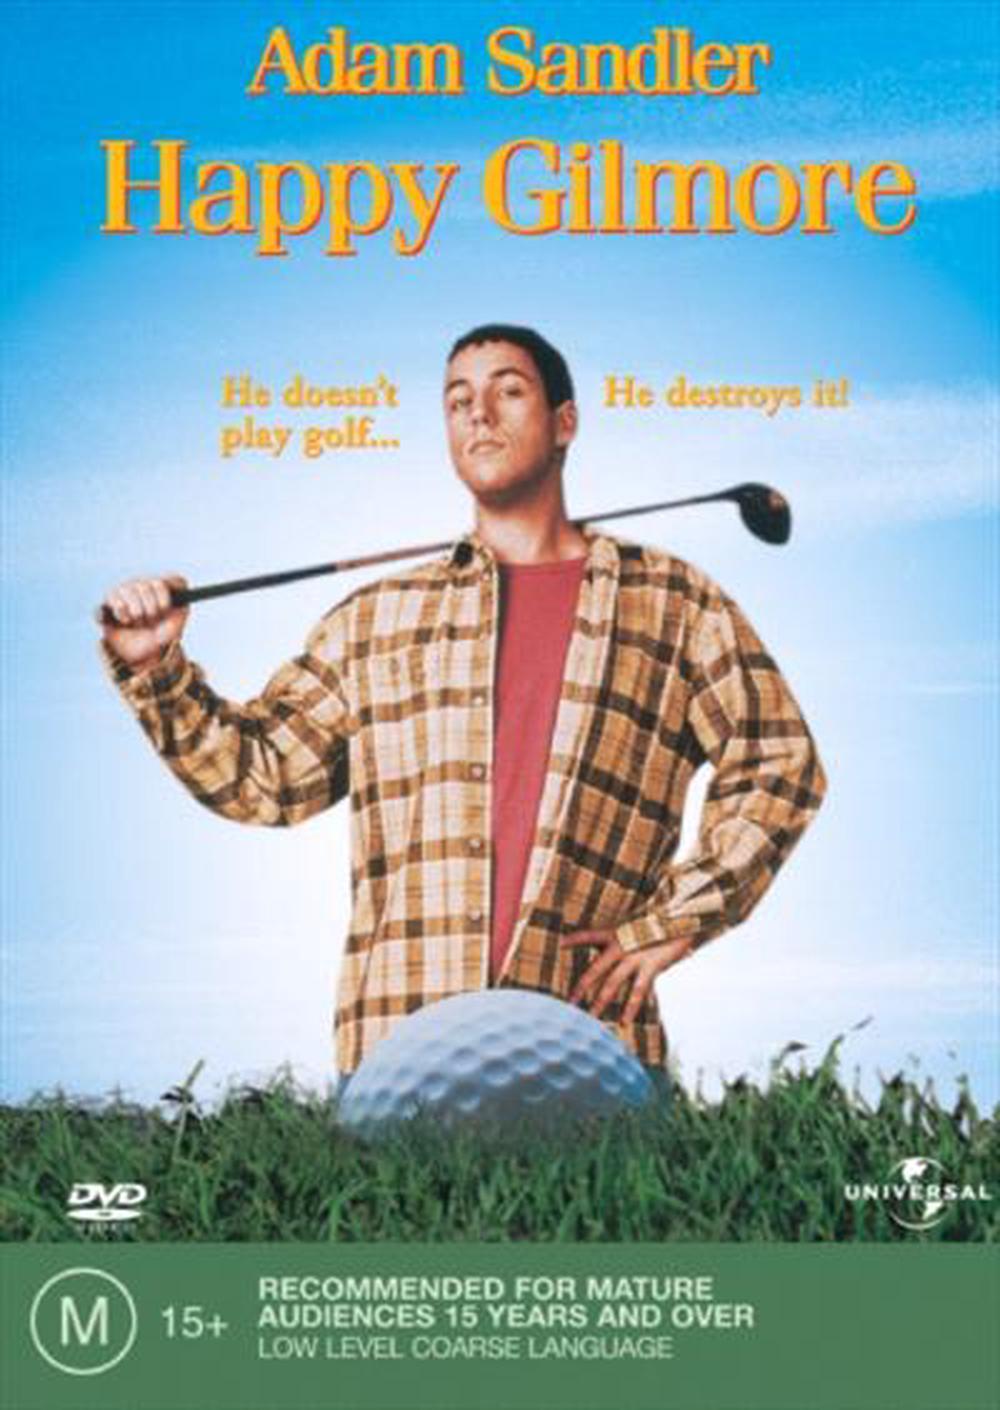 Happy Gilmore, DVD Buy online at The Nile